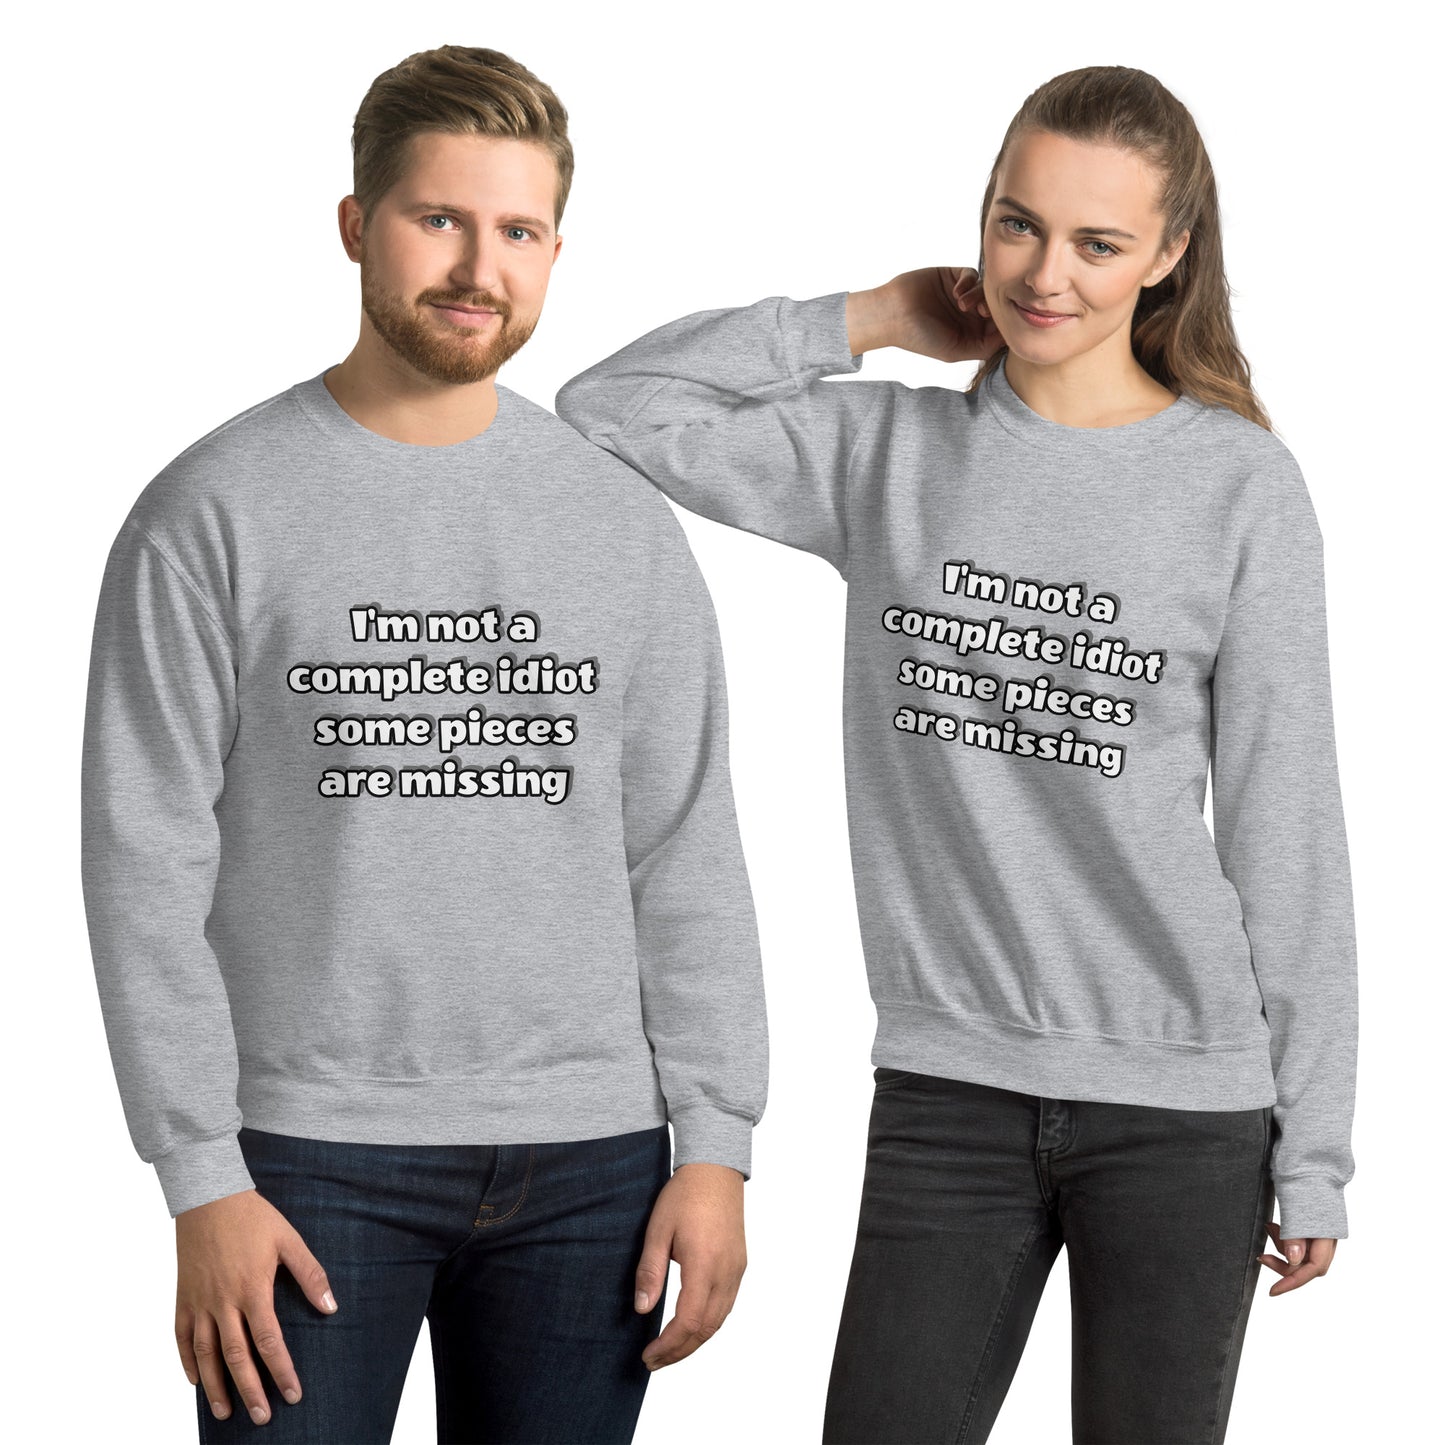 Man and women with grey sweatshirt with text “I’m not a complete idiot, some pieces are missing”